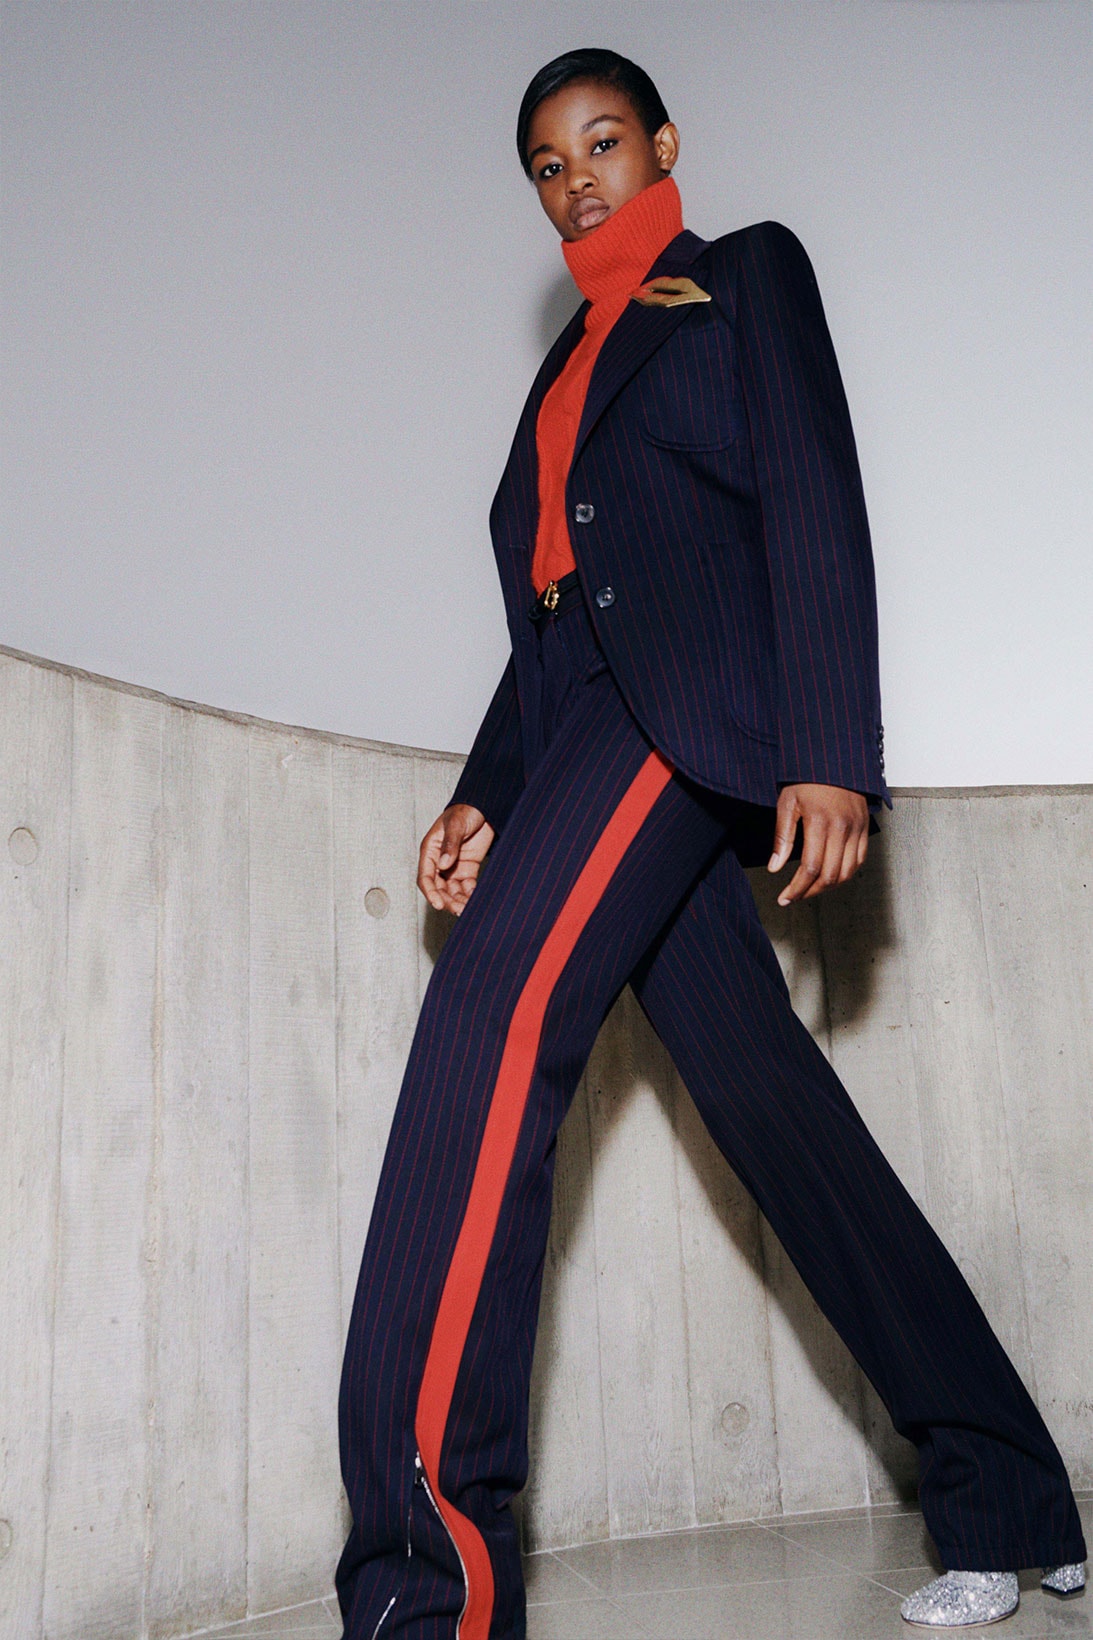 victoria beckham fall winter 2021 fw21 collection striped black navy orange red jacket blazer suit trousers